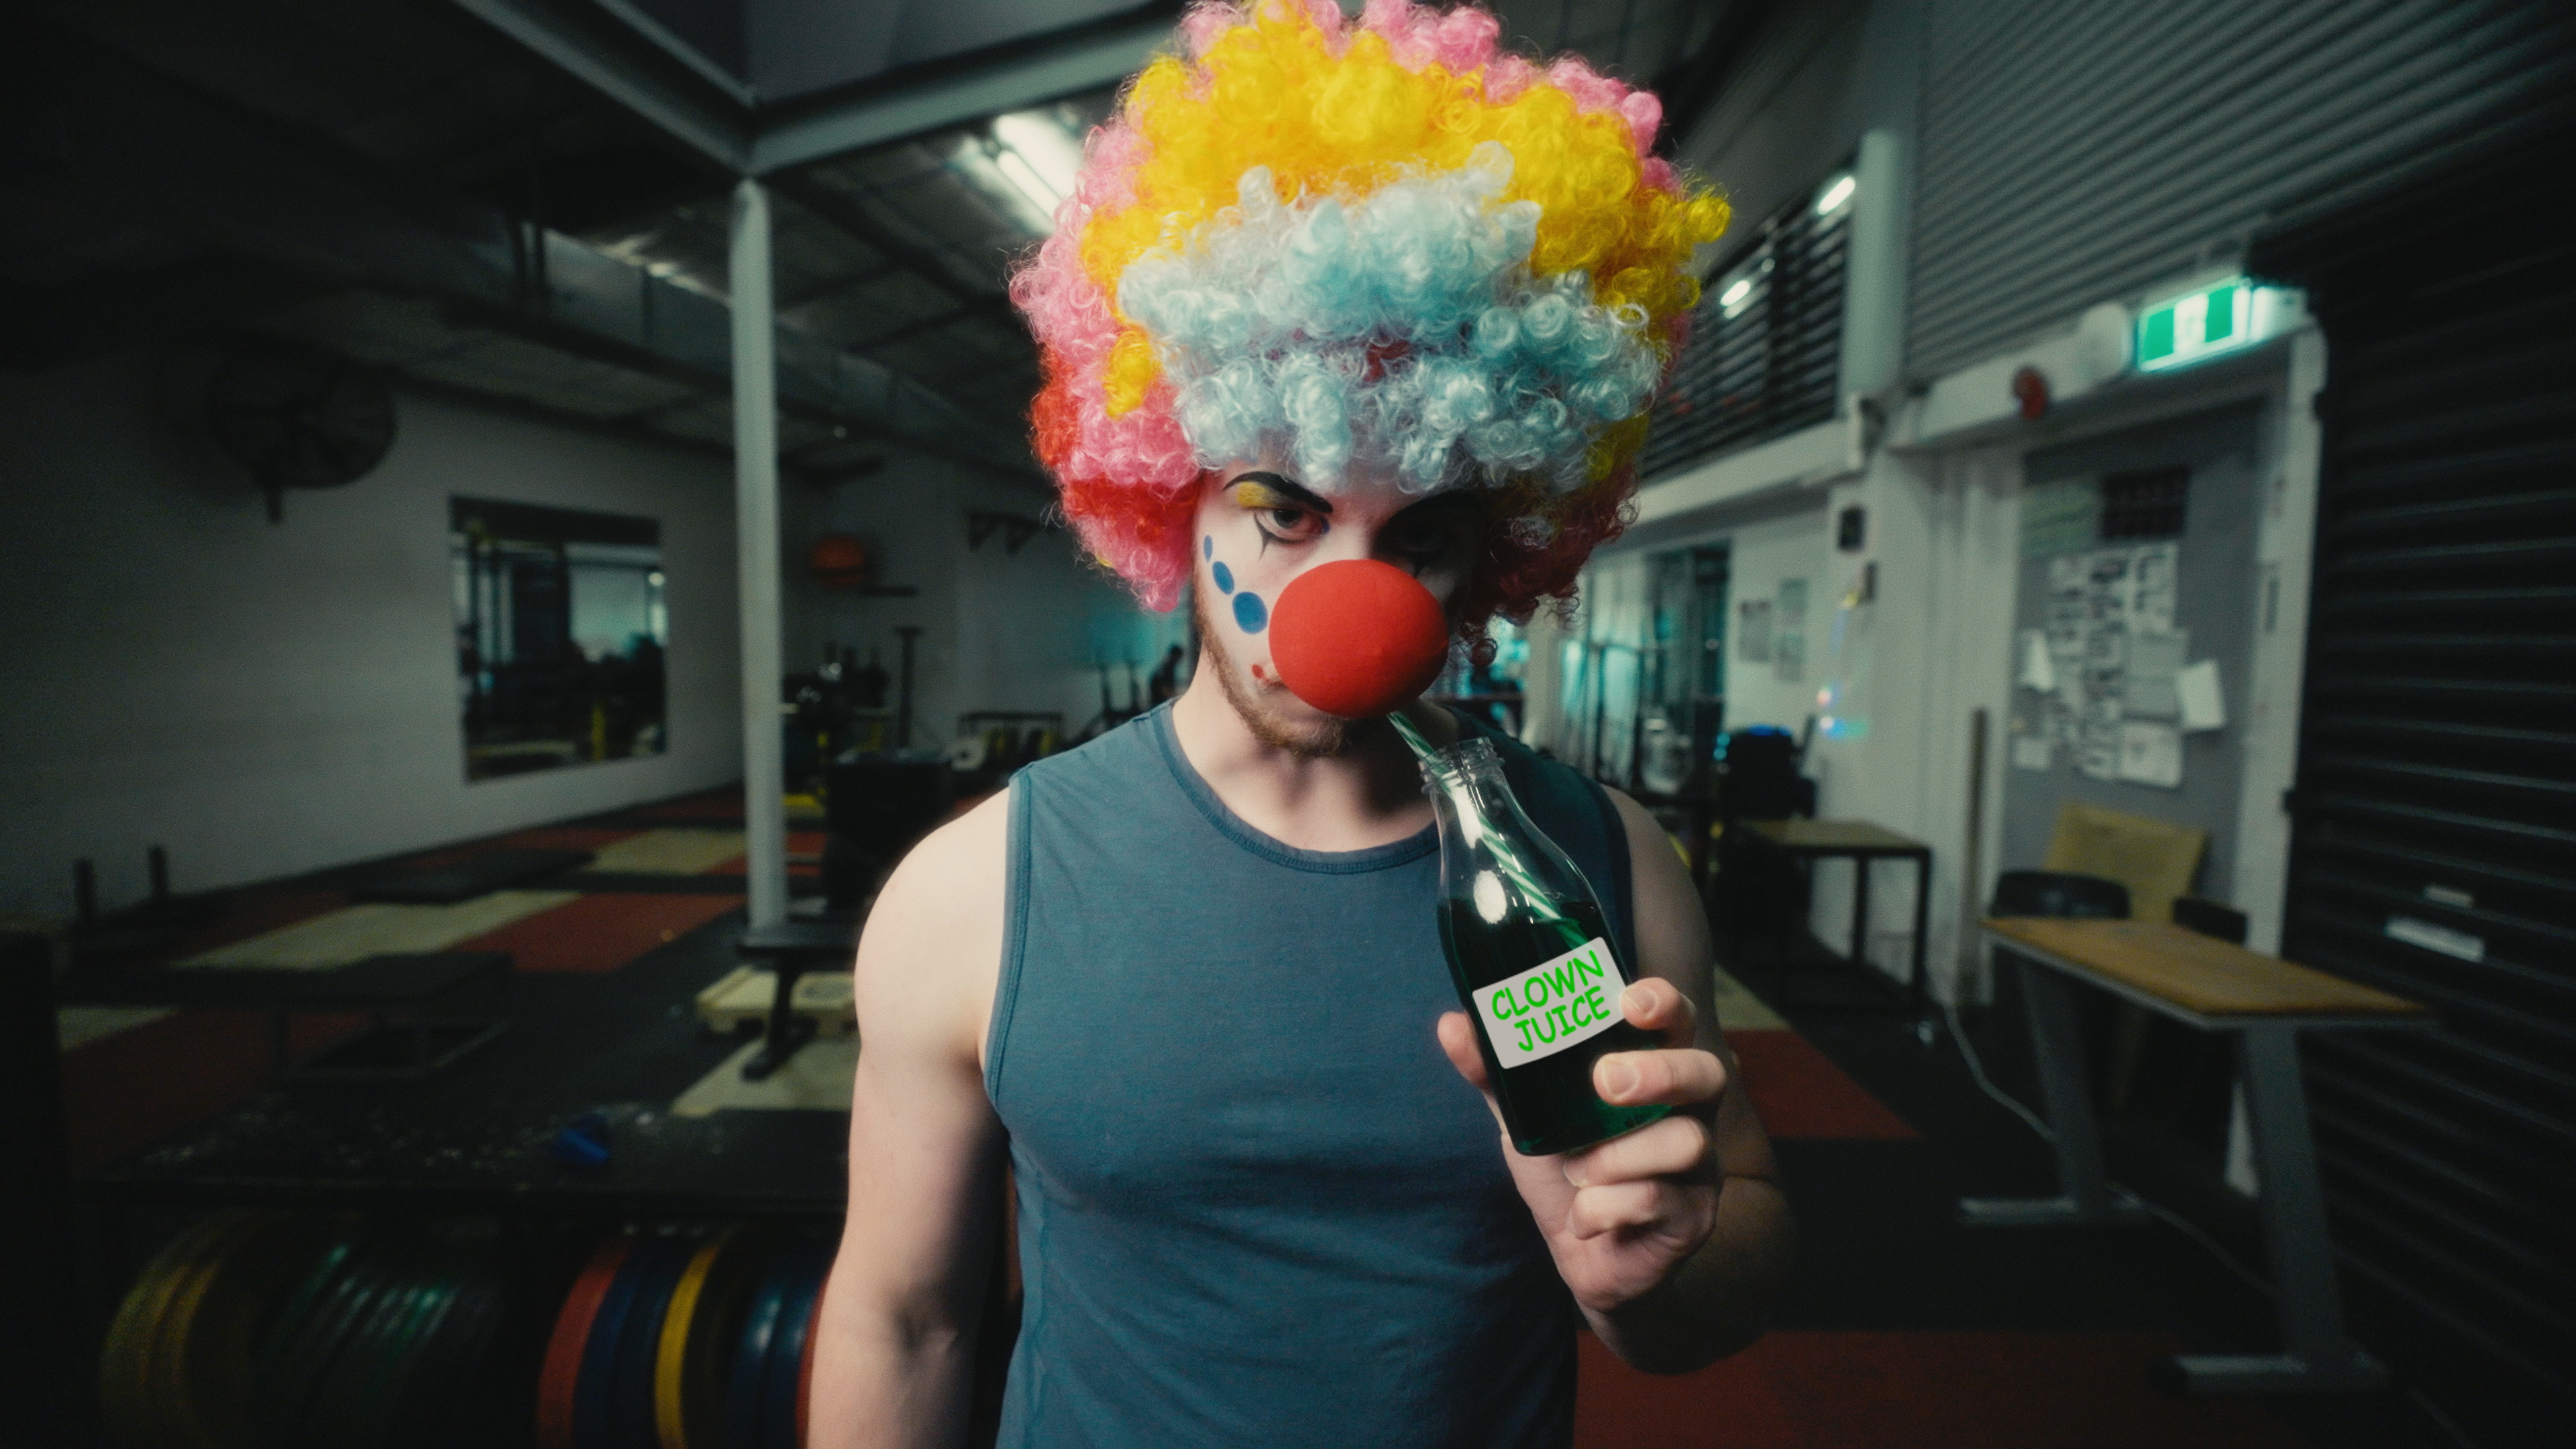 Sinister gym clown drinks from a bottle marked 'Clown Juice'.